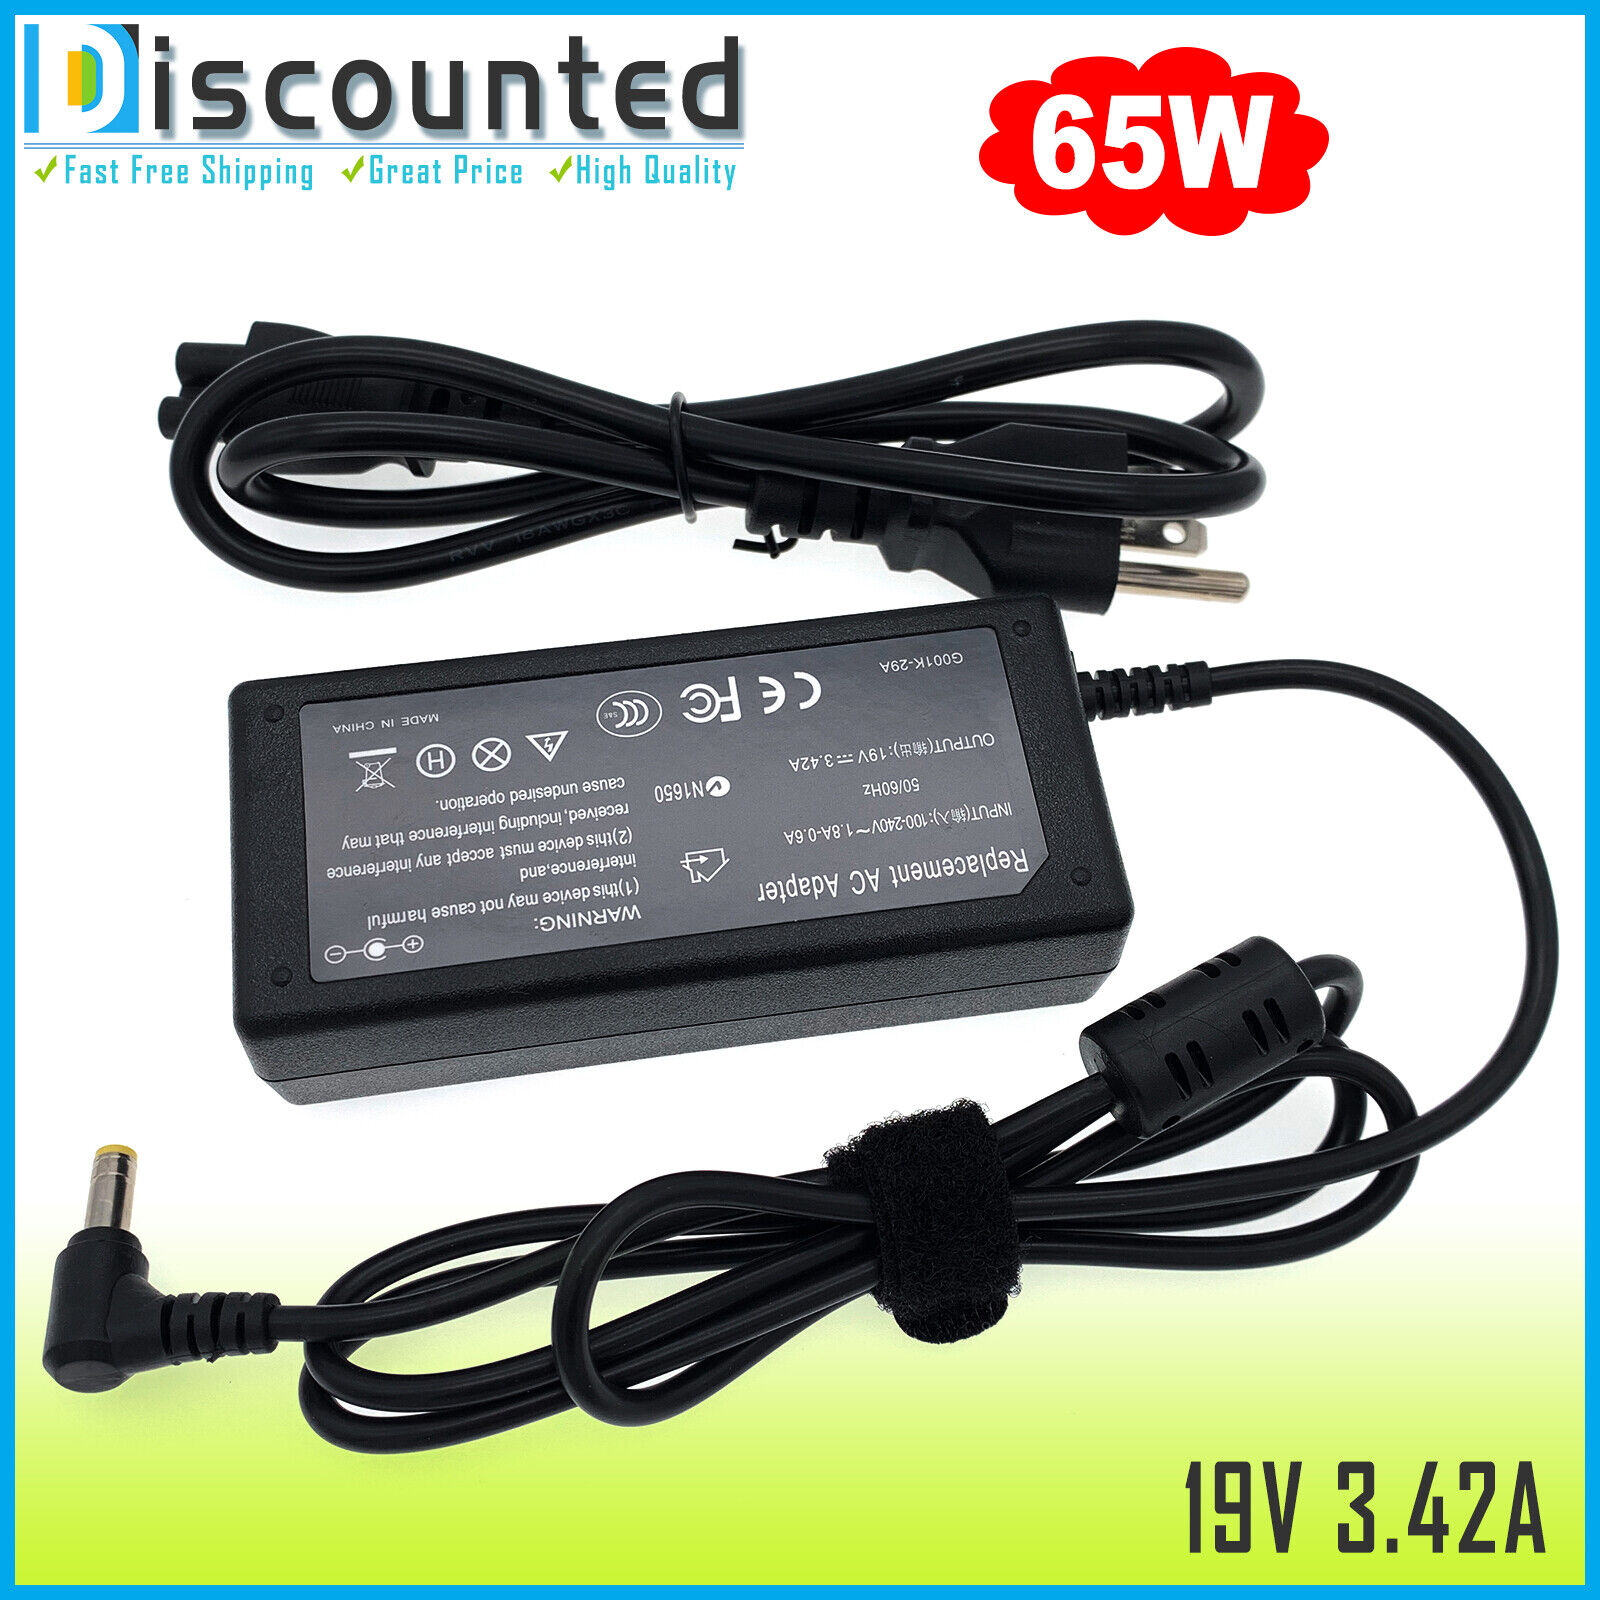 65W AC Power Adapter Charger For JBL Boombox 1 2 Wireless Bluetooth Speaker